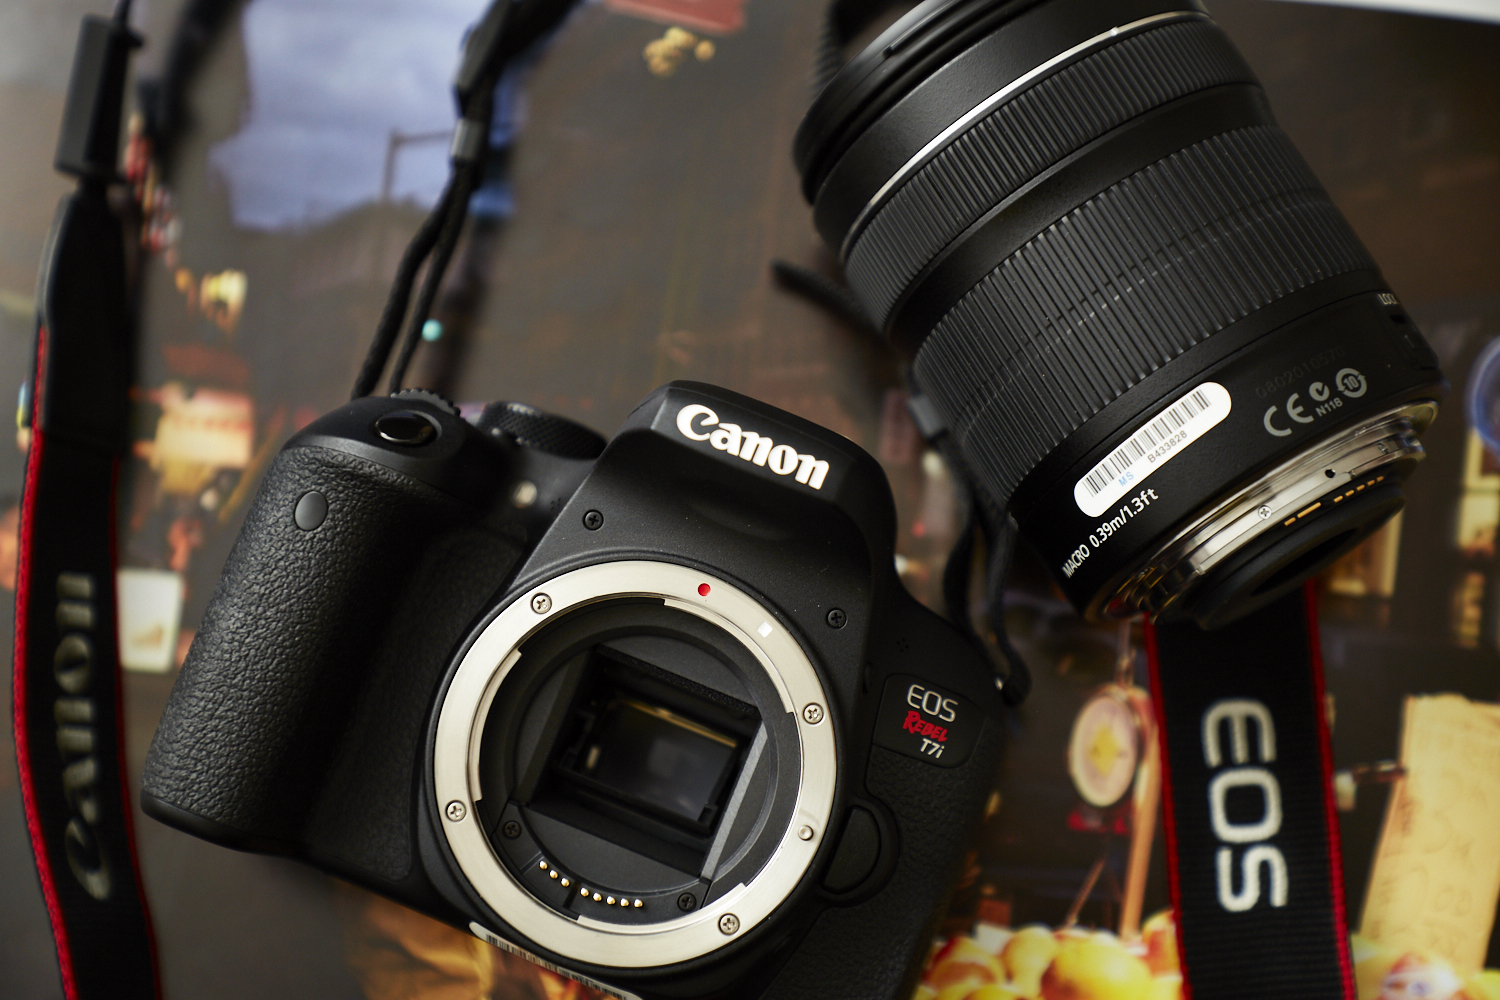 Review: Canon Rebel T7i (Canon's Sort of In The Middle APS-C DSLR)